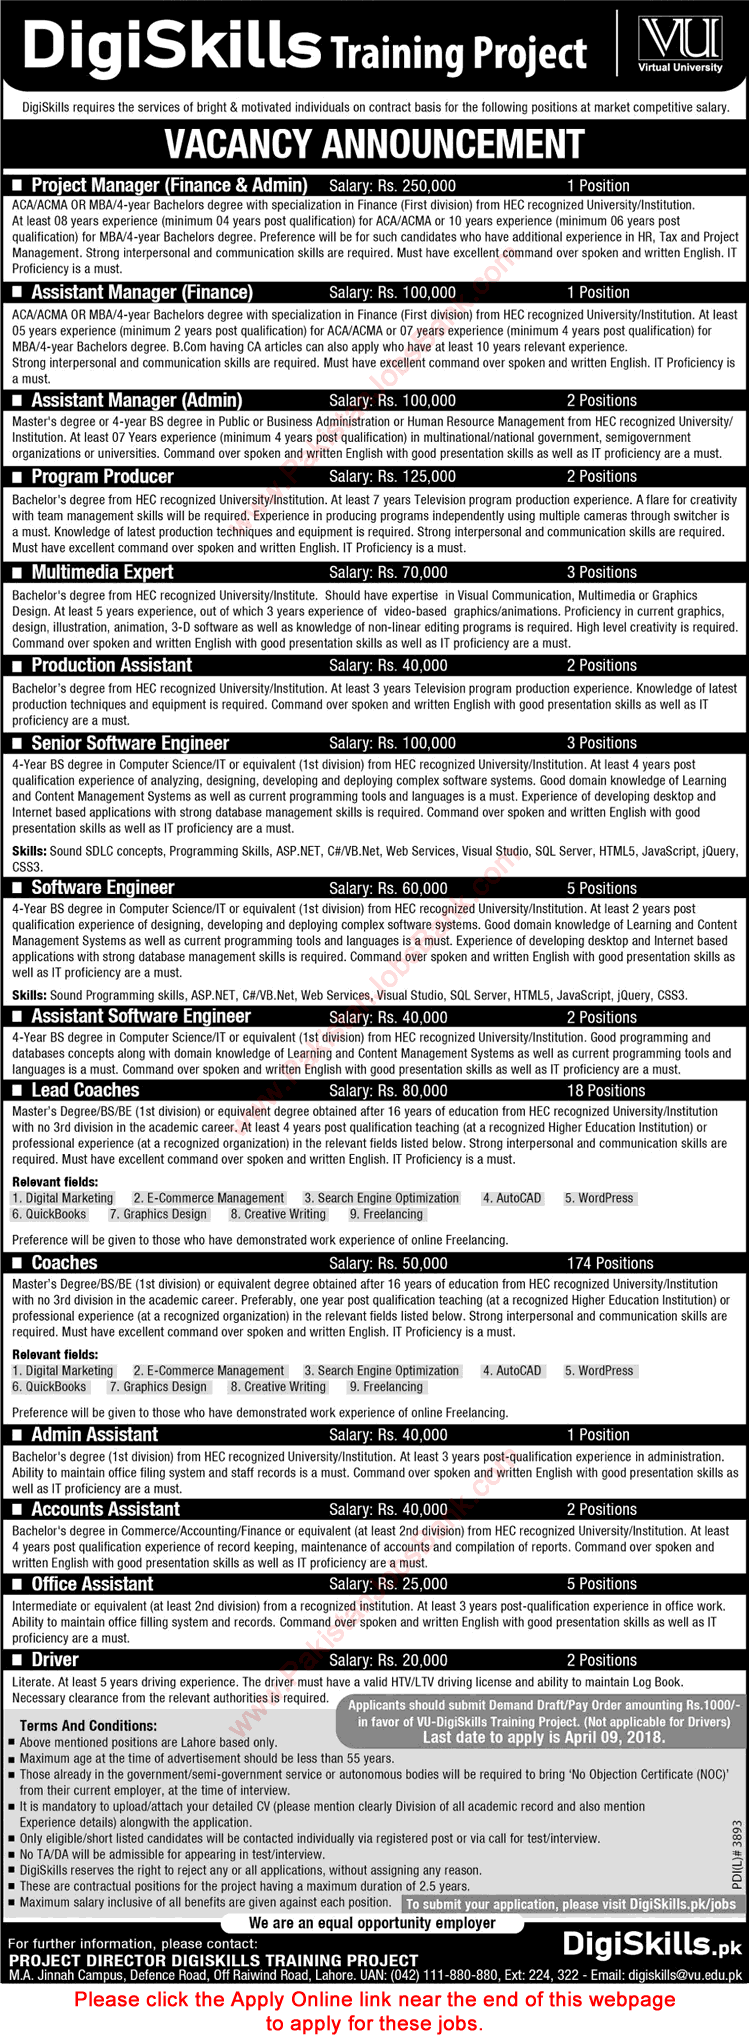 Virtual University Jobs 2018 March Apply Online Coaches & Others DigiSkills Training Project Latest